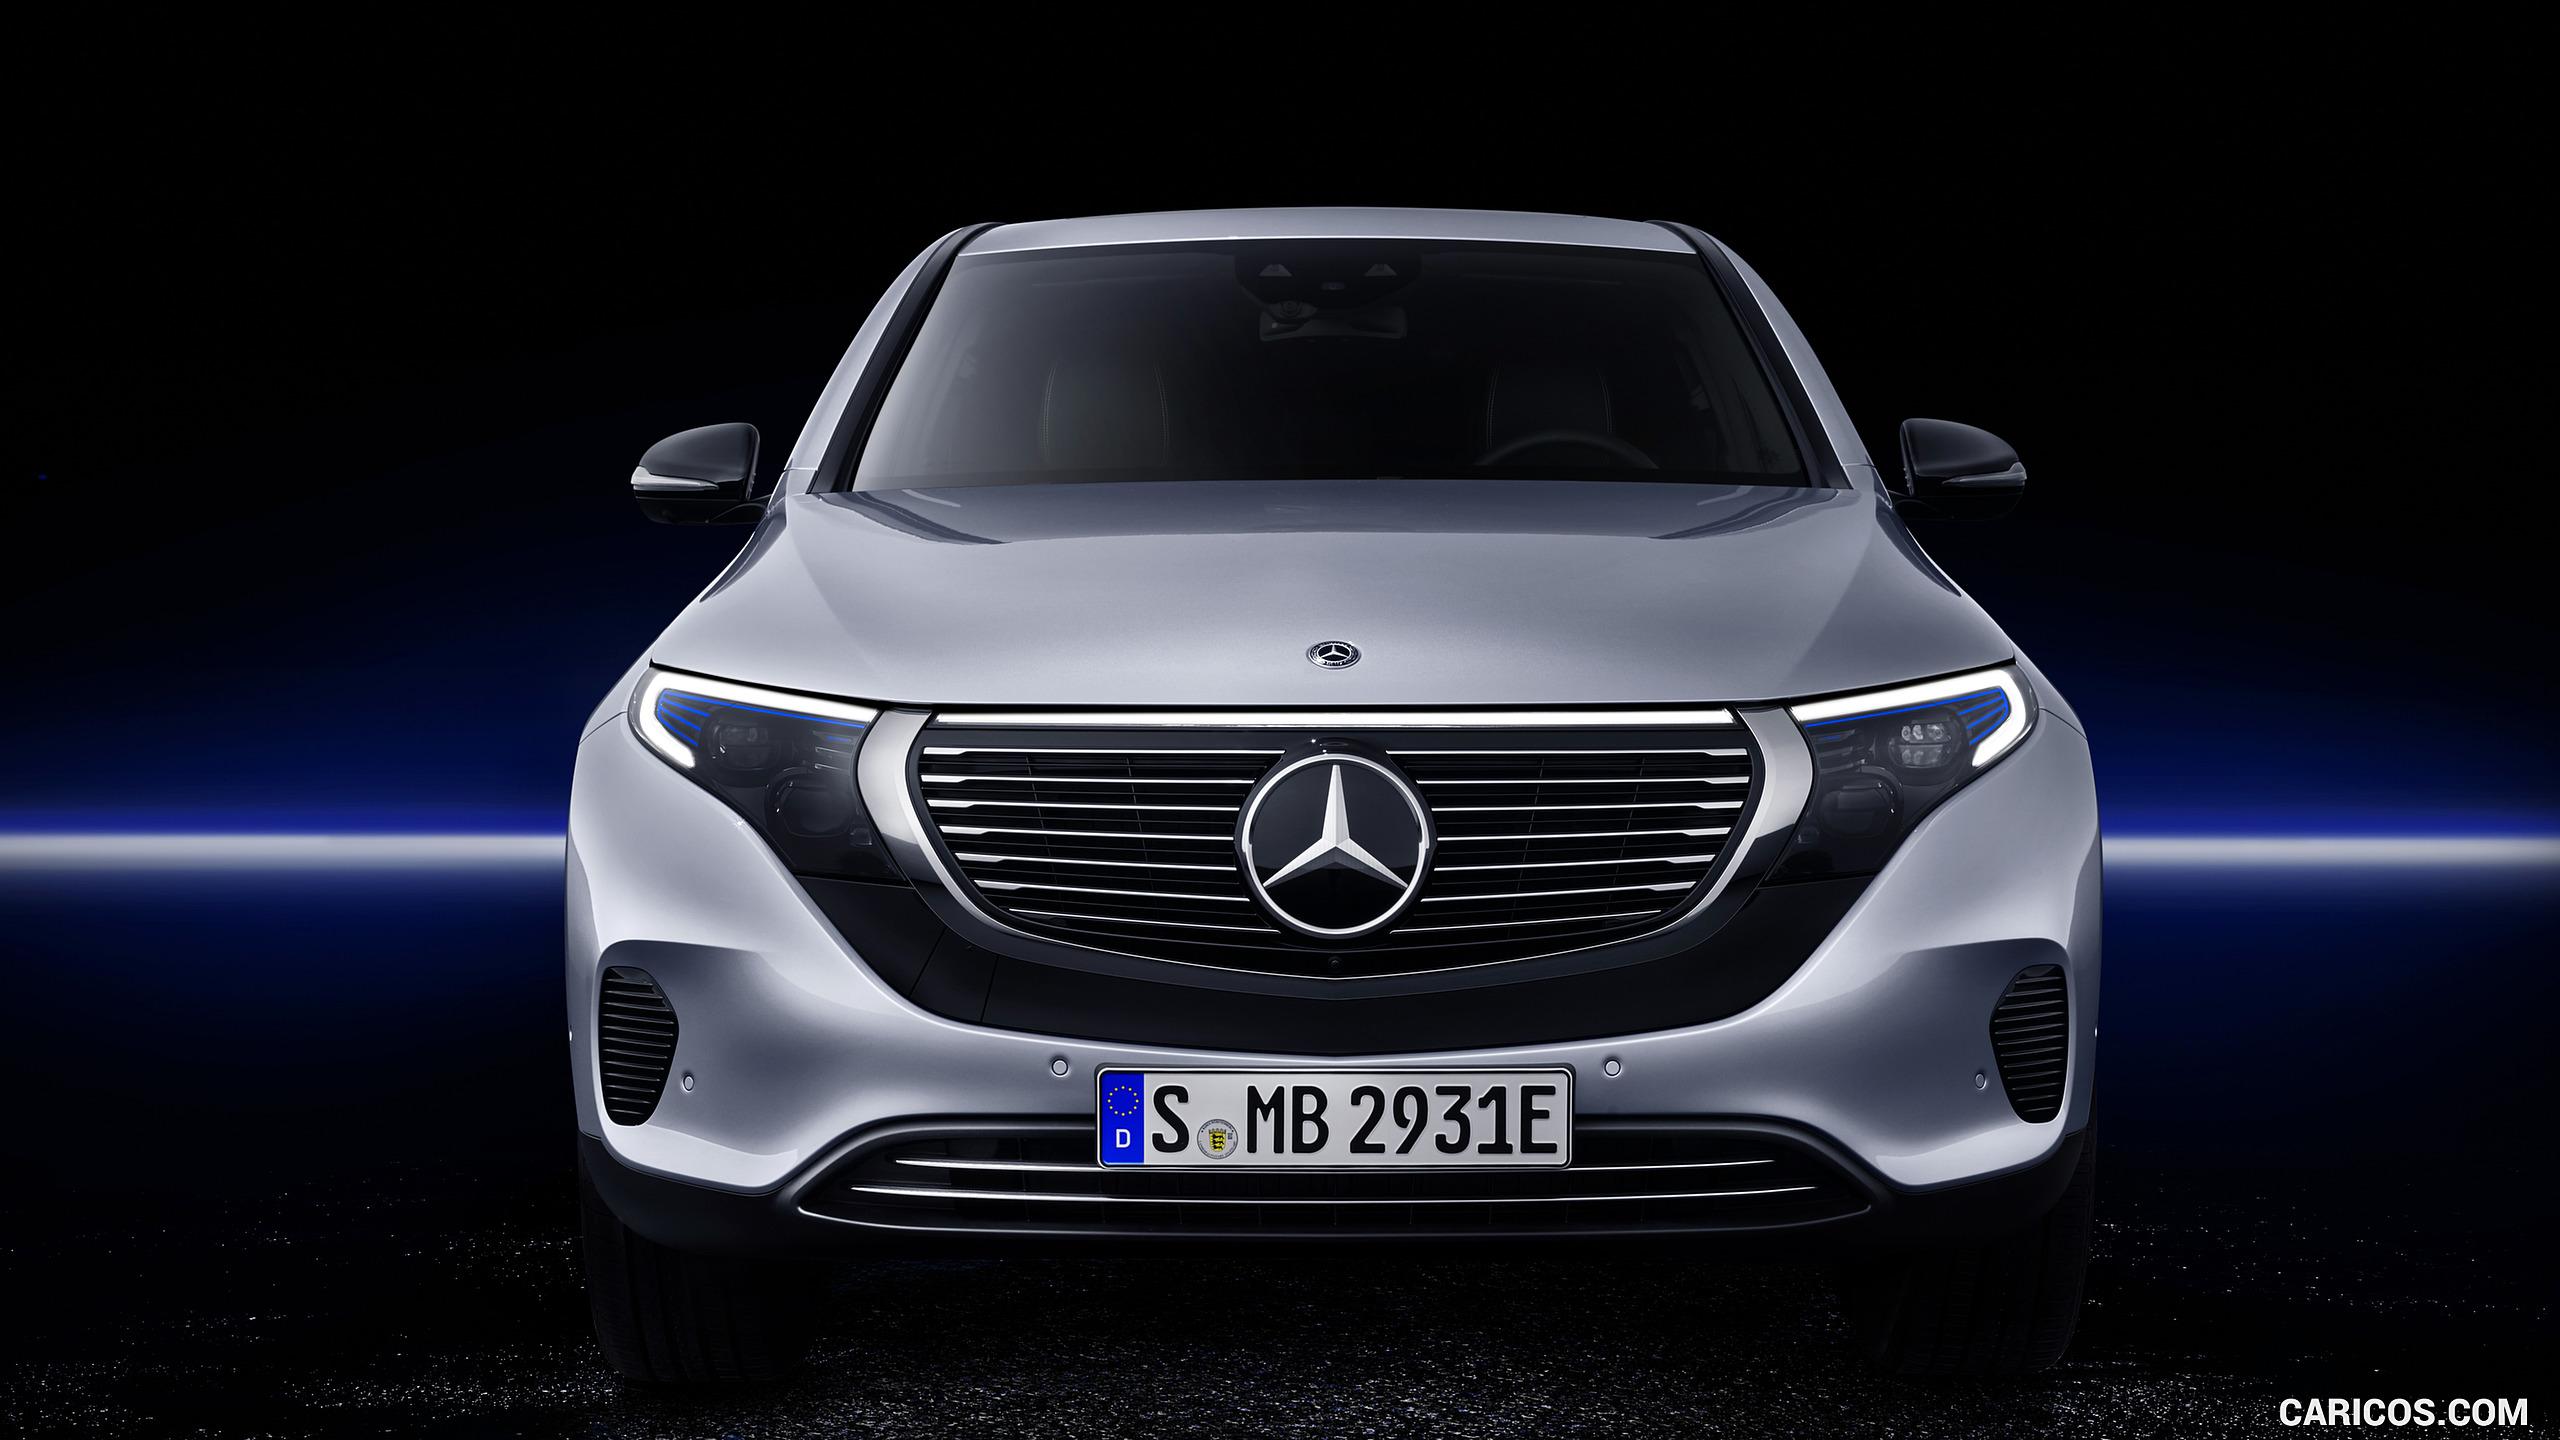 Download Mercedes Benz EQC Wallpapers Free for Android - Mercedes Benz EQC  Wallpapers APK Download - STEPrimo.com